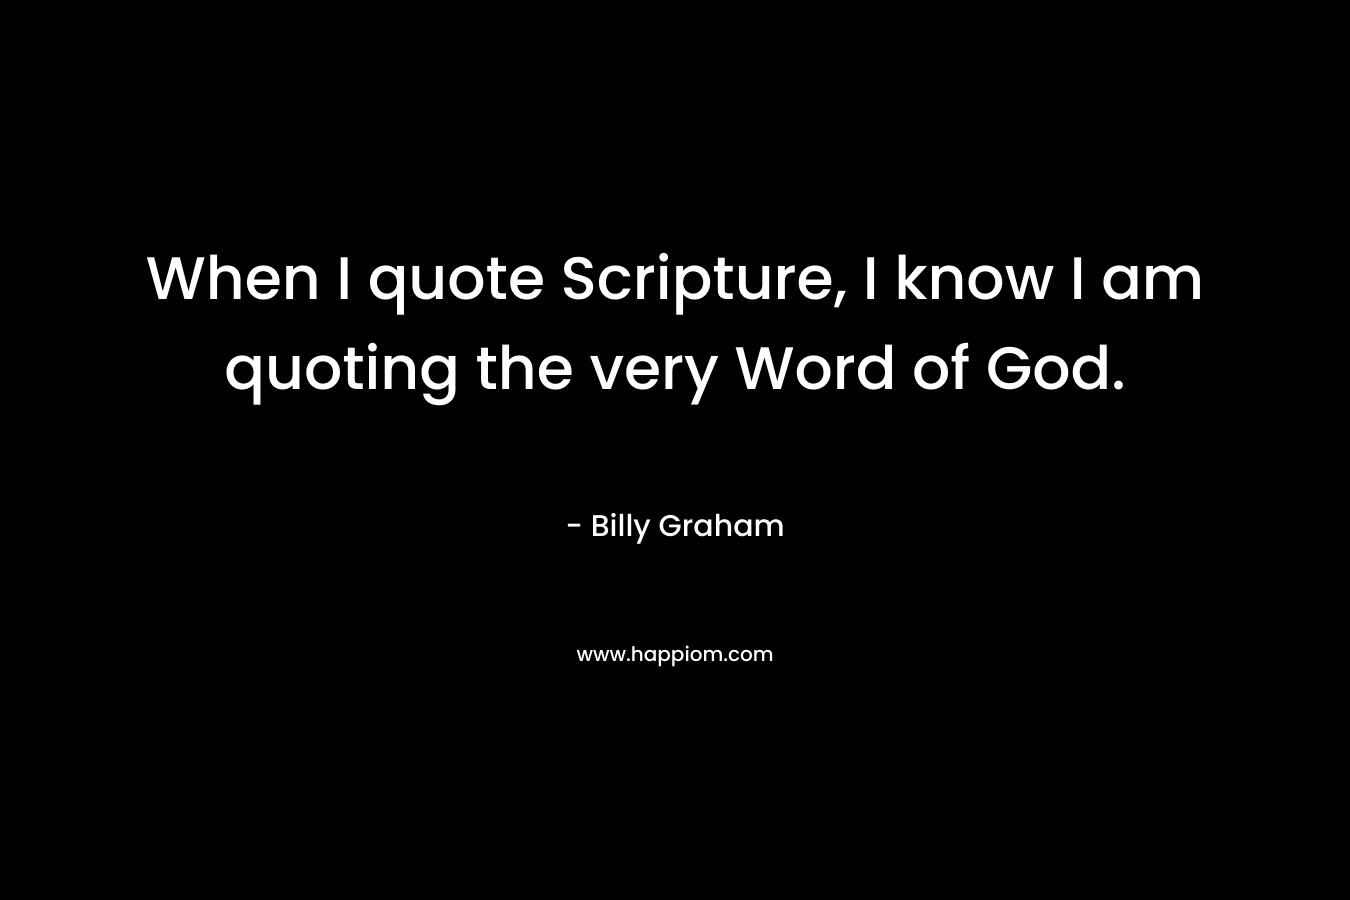 When I quote Scripture, I know I am quoting the very Word of God. – Billy Graham